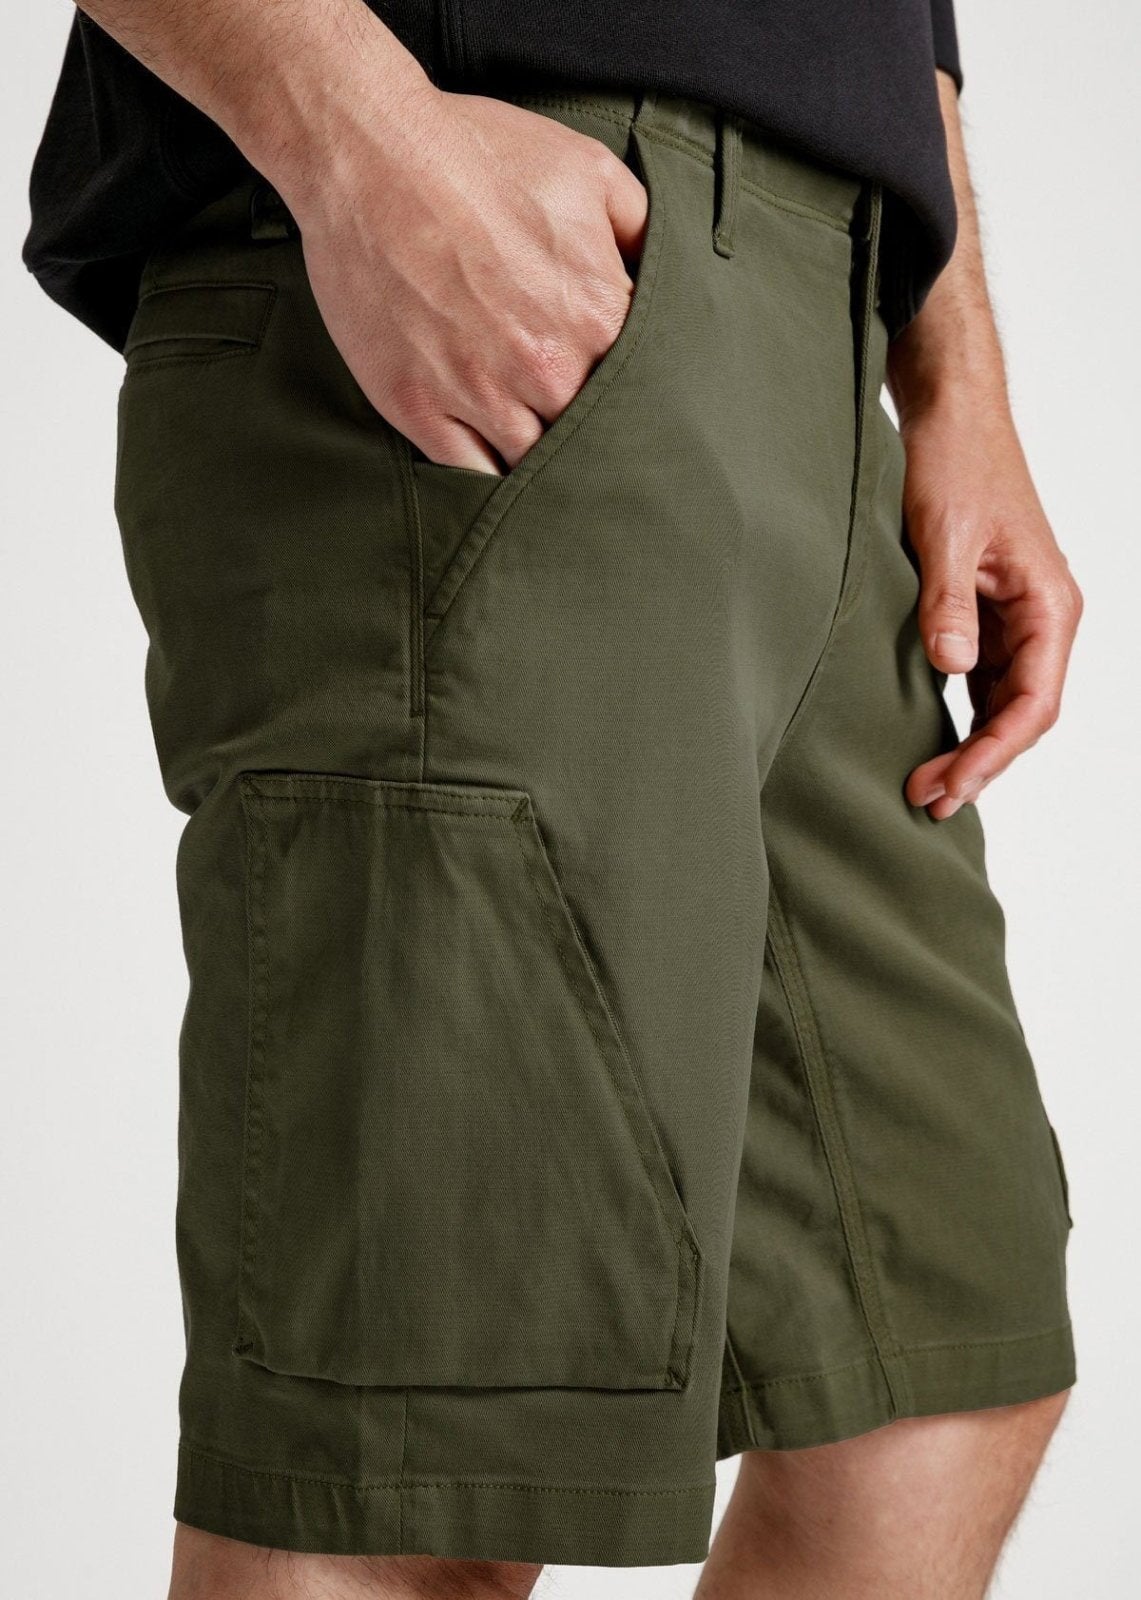 mens green athletic adventure pant side detail